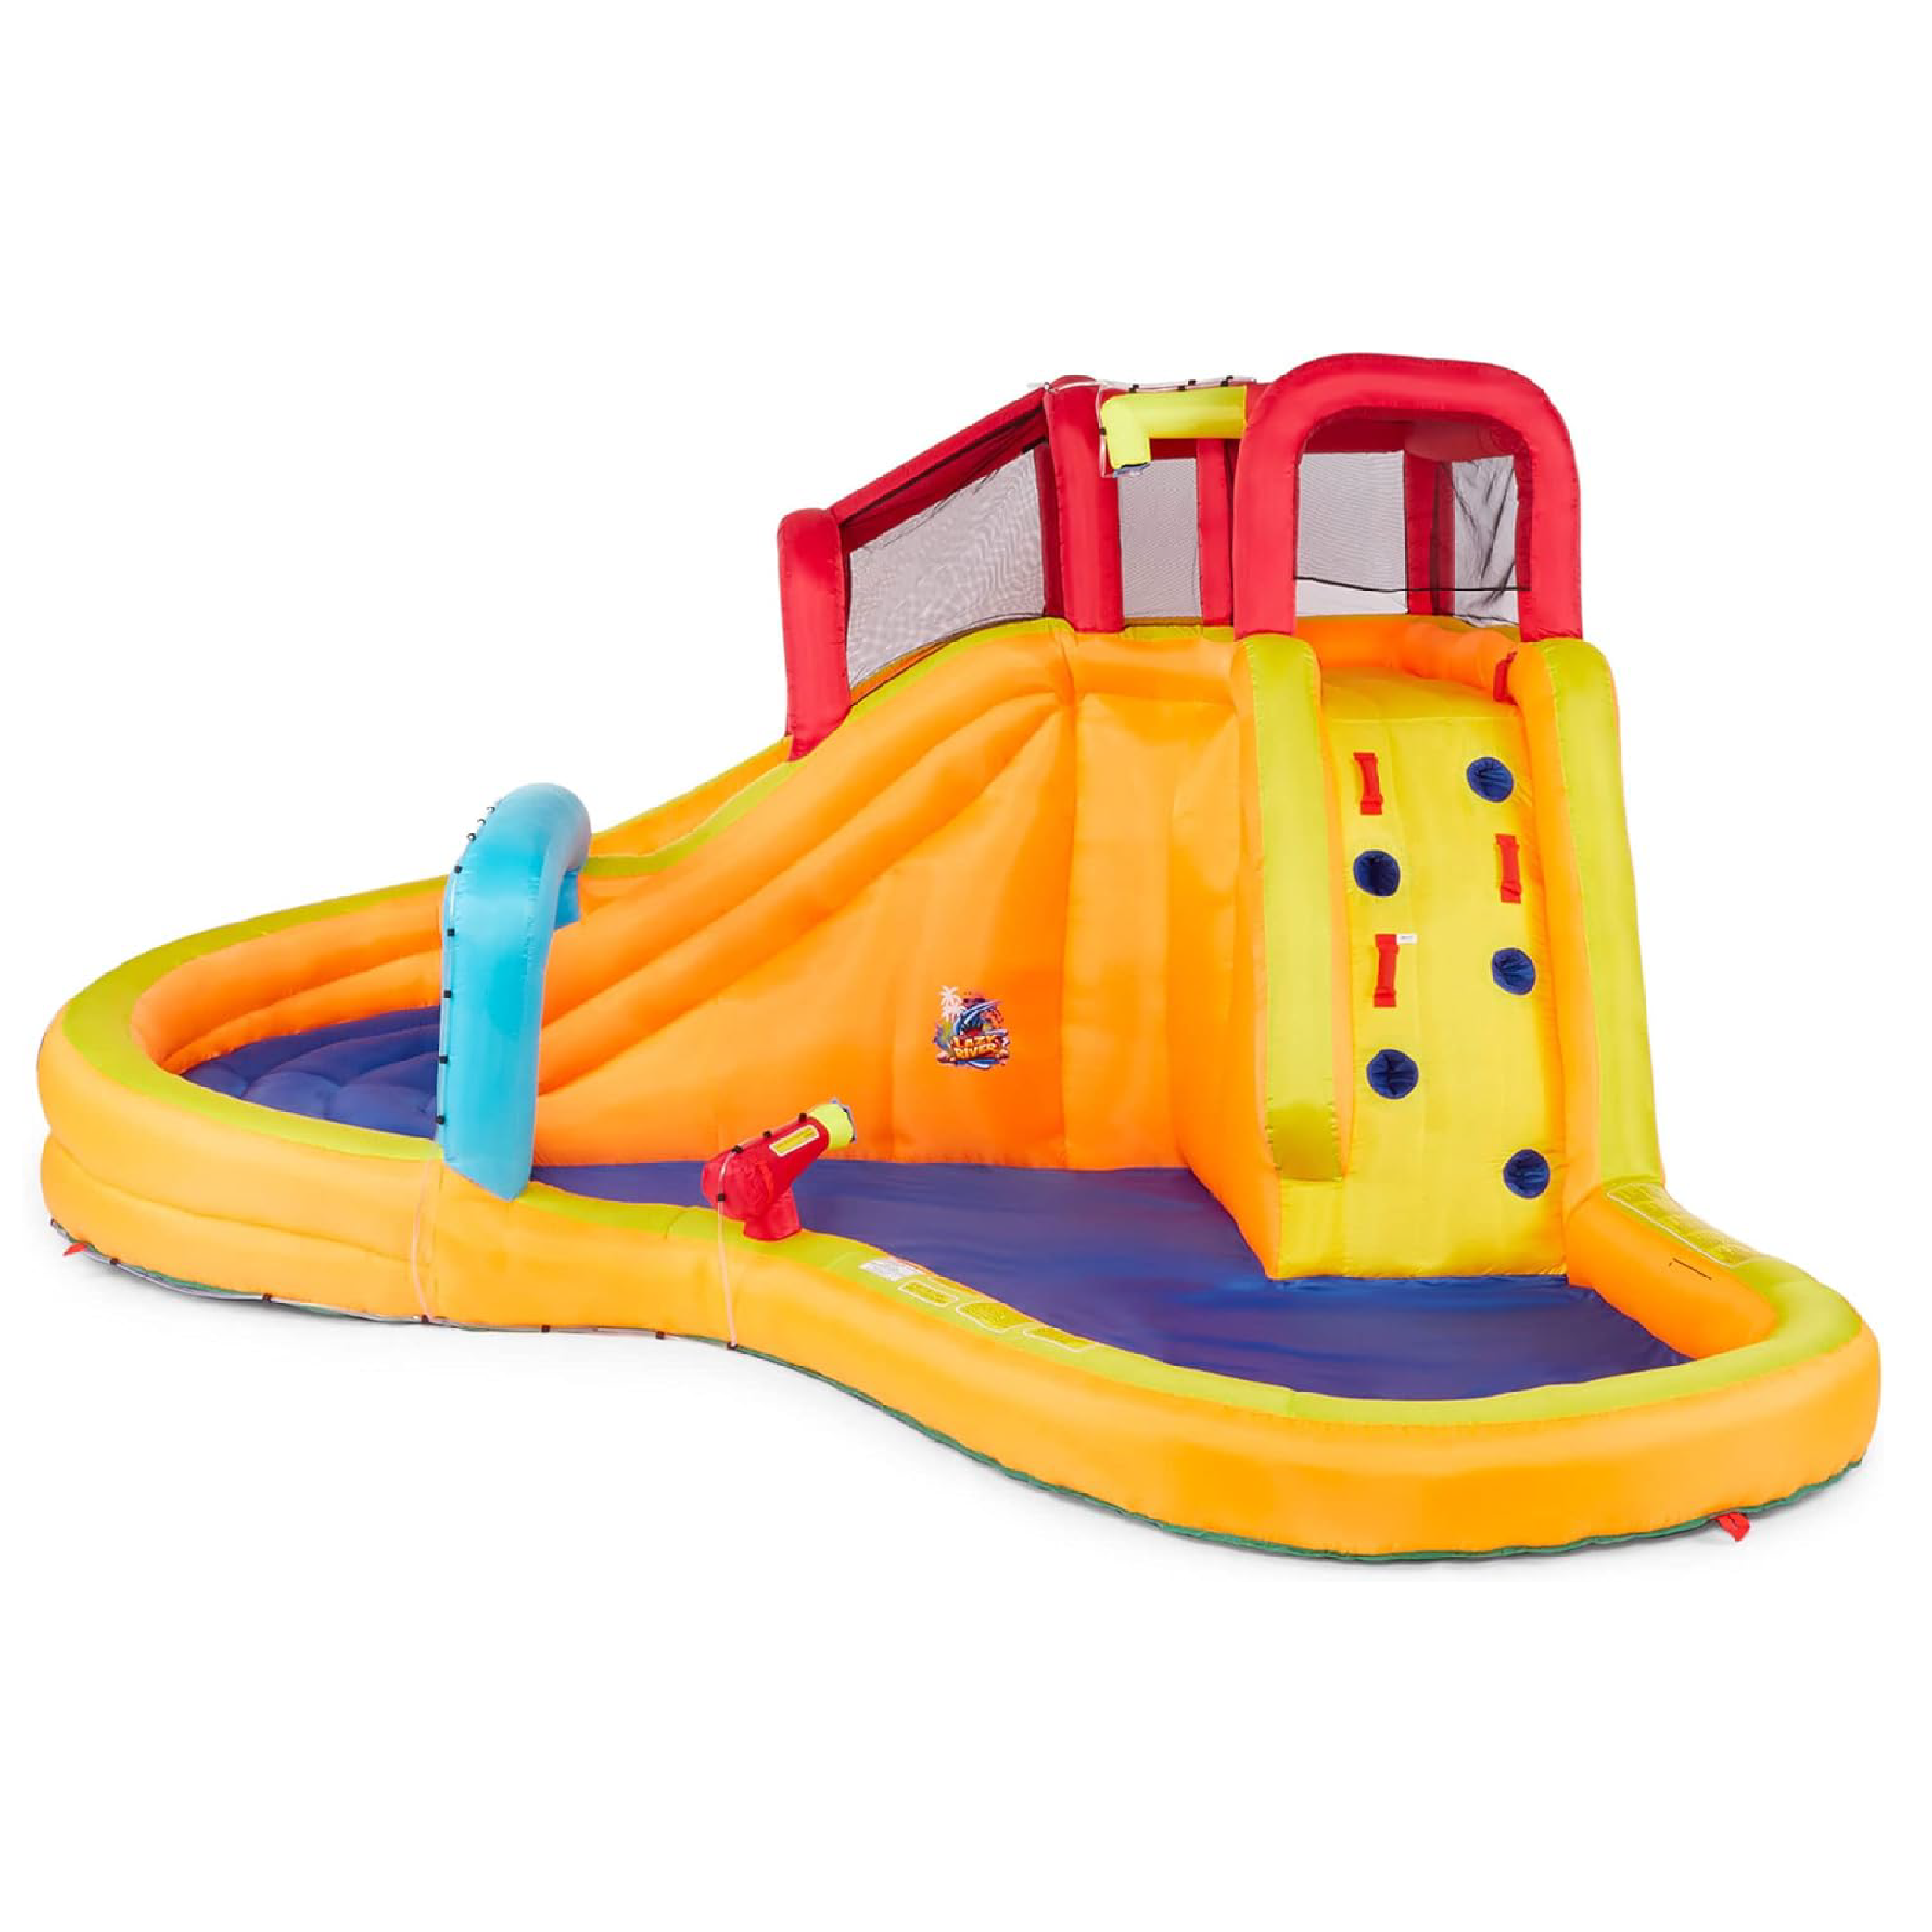 Banzai Kids Inflatable Outdoor Lazy River Adventure Water Park Slide & Pool - image 1 of 6